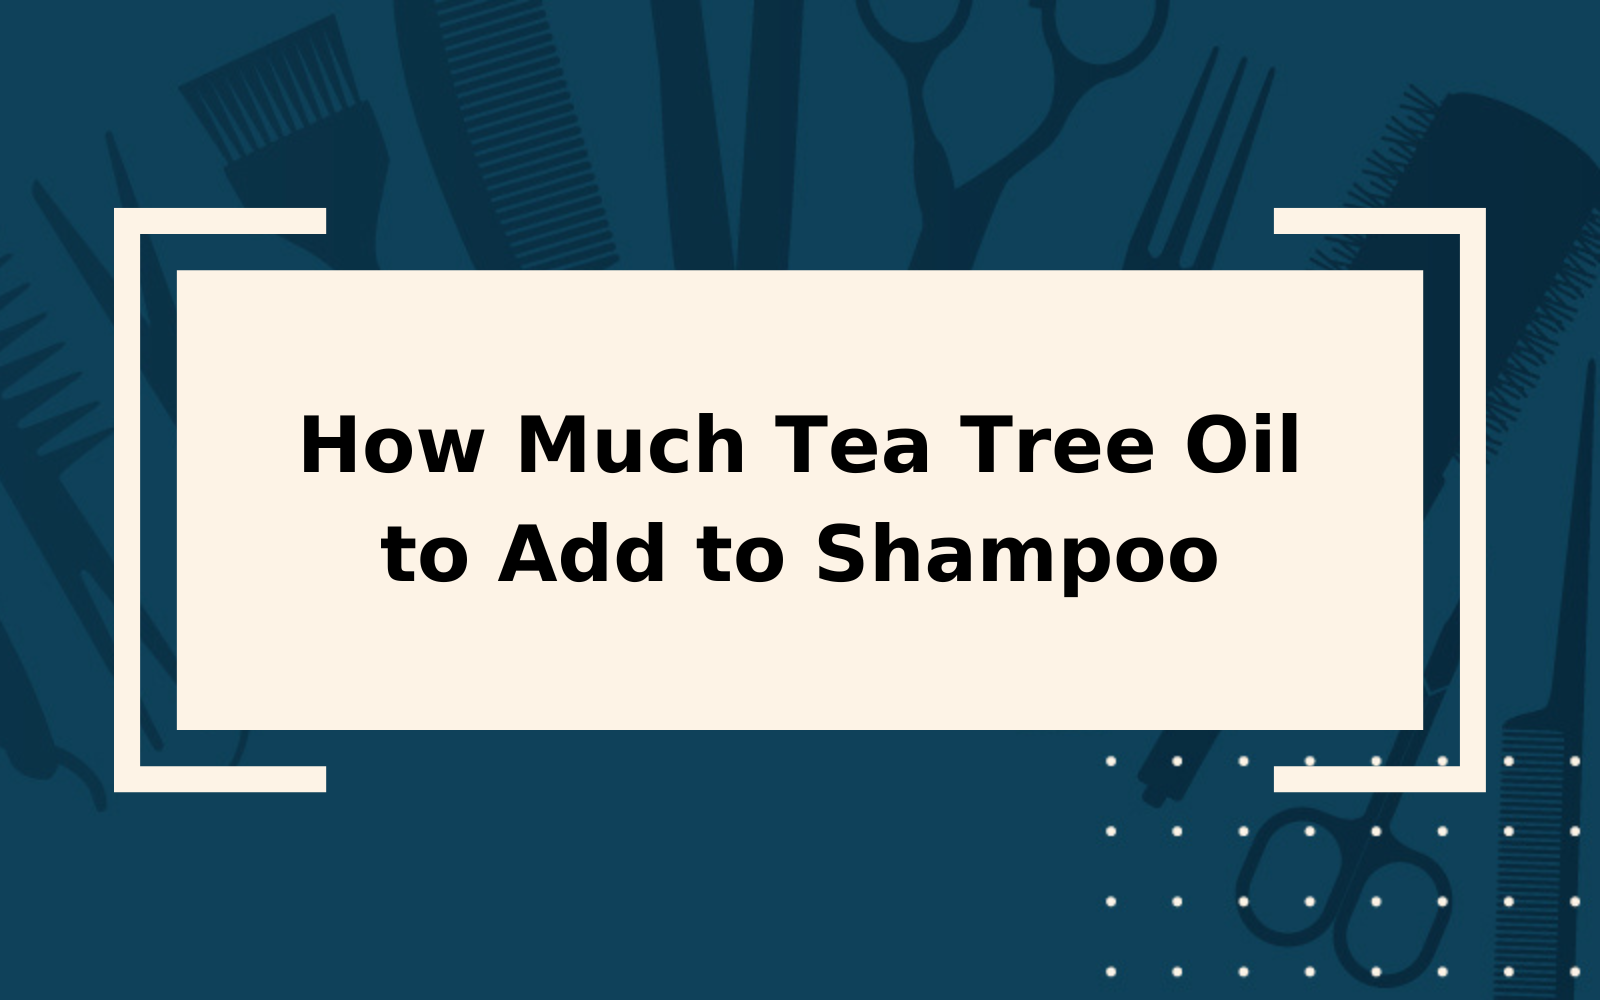 How Much Tea Tree Oil to Add to Shampoo